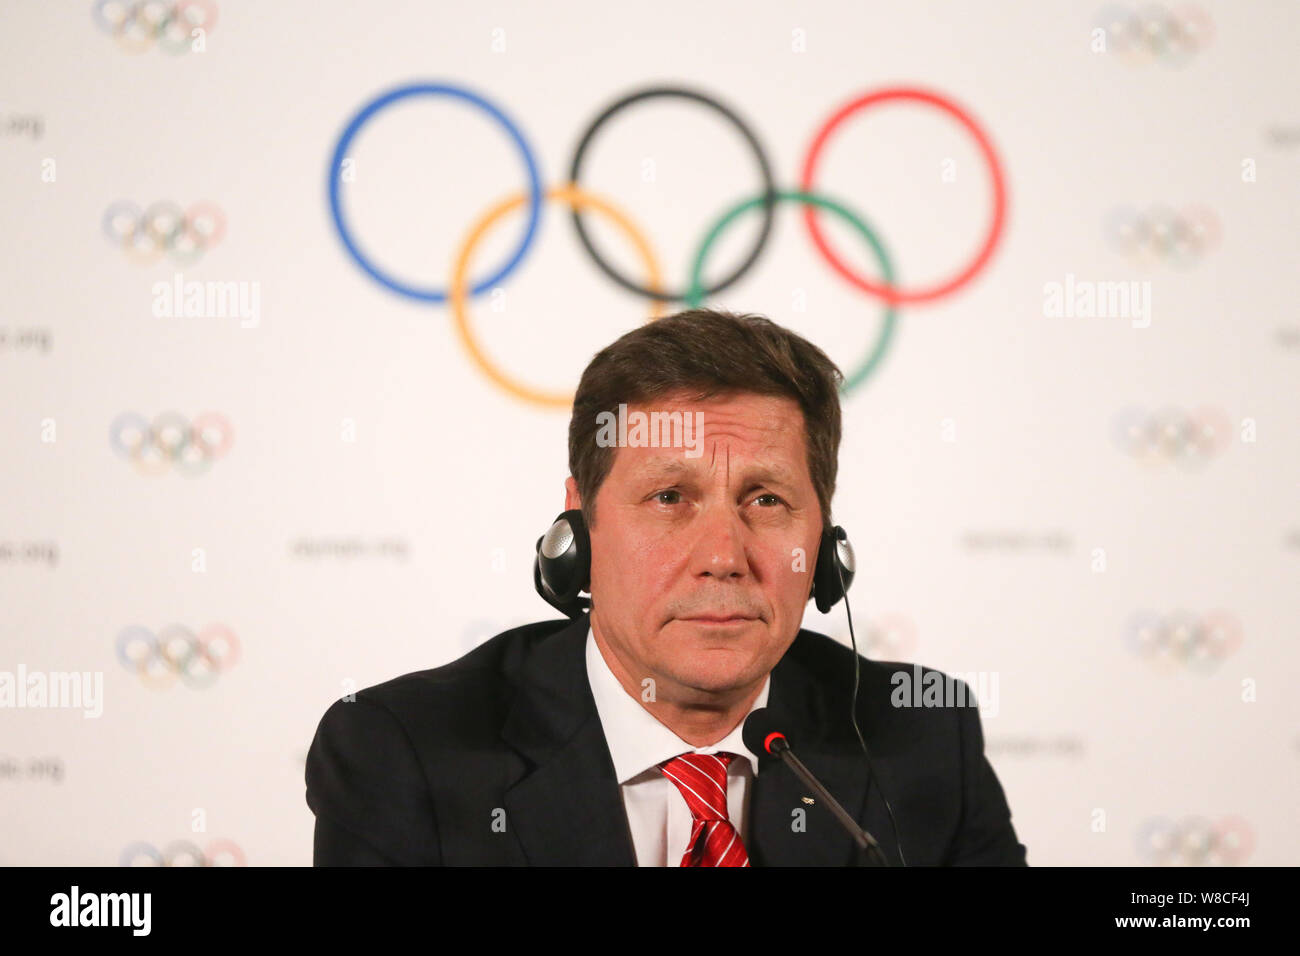 Alexander Zhukov, head of the 2022 Evaluation Commission for the International Olympic Committee (IOC), attends a closing ceremony at the end of the I Stock Photo